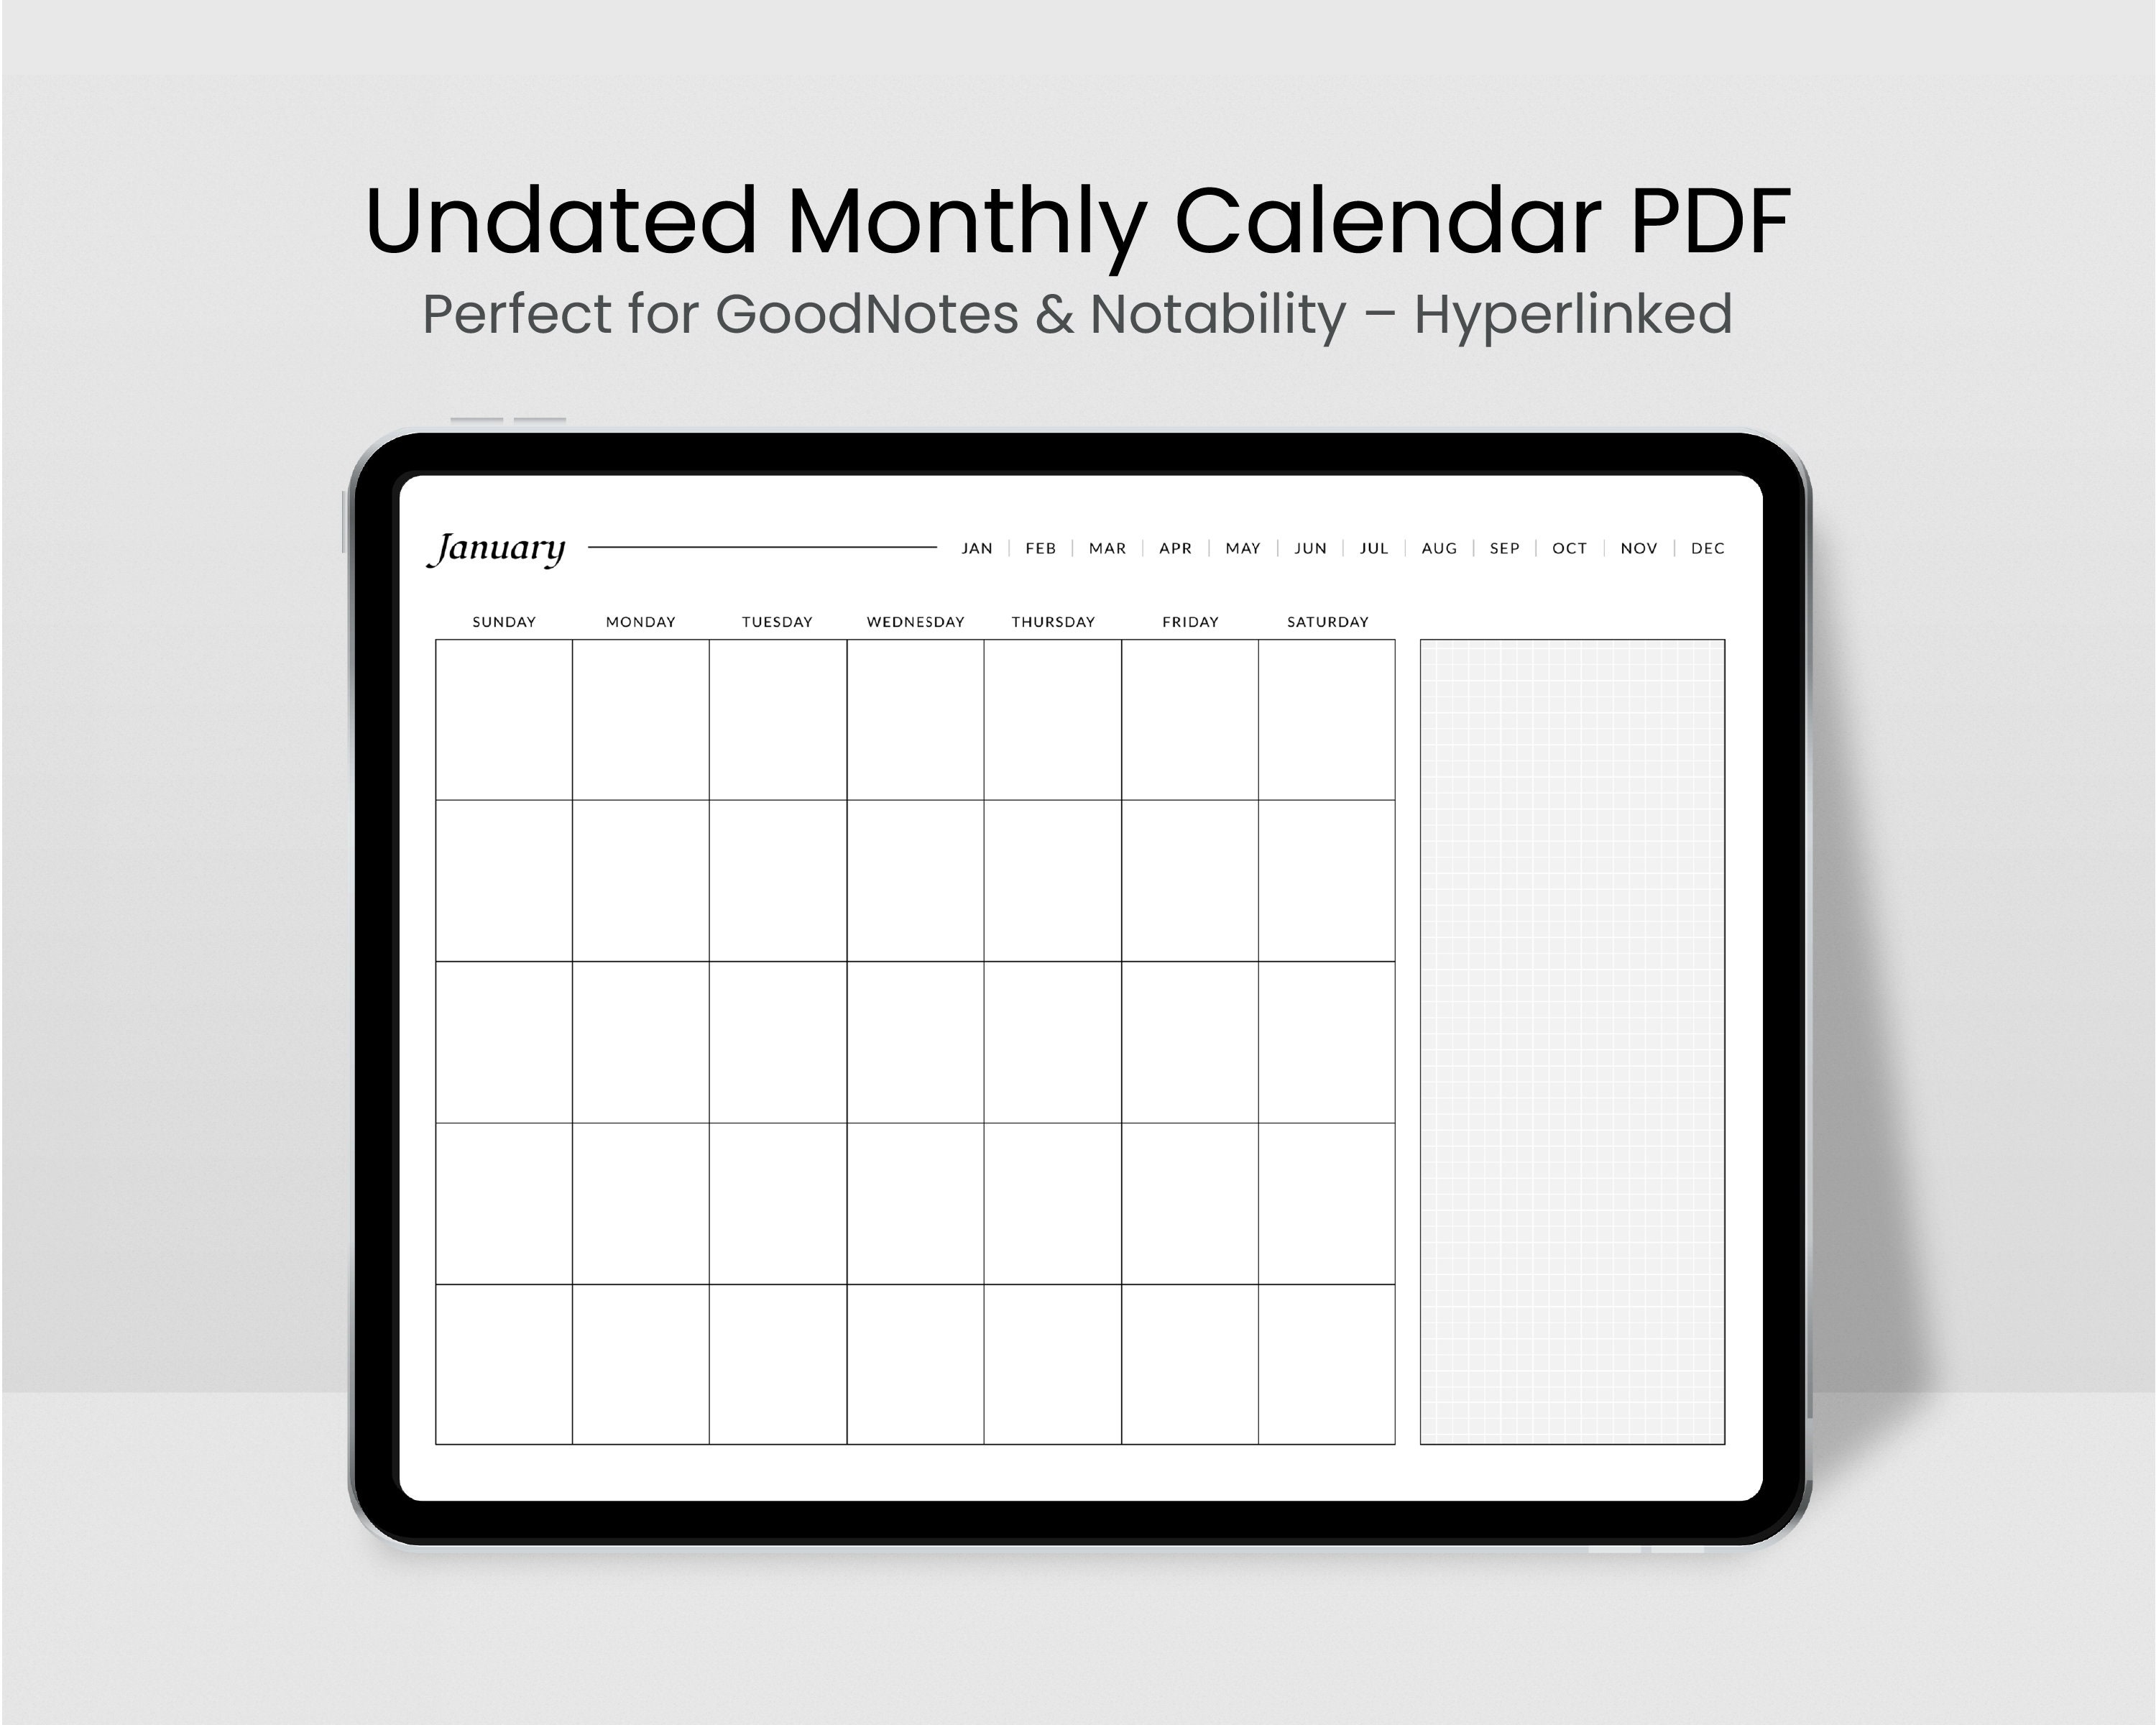 goodnotes-monthly-calendar-template-free